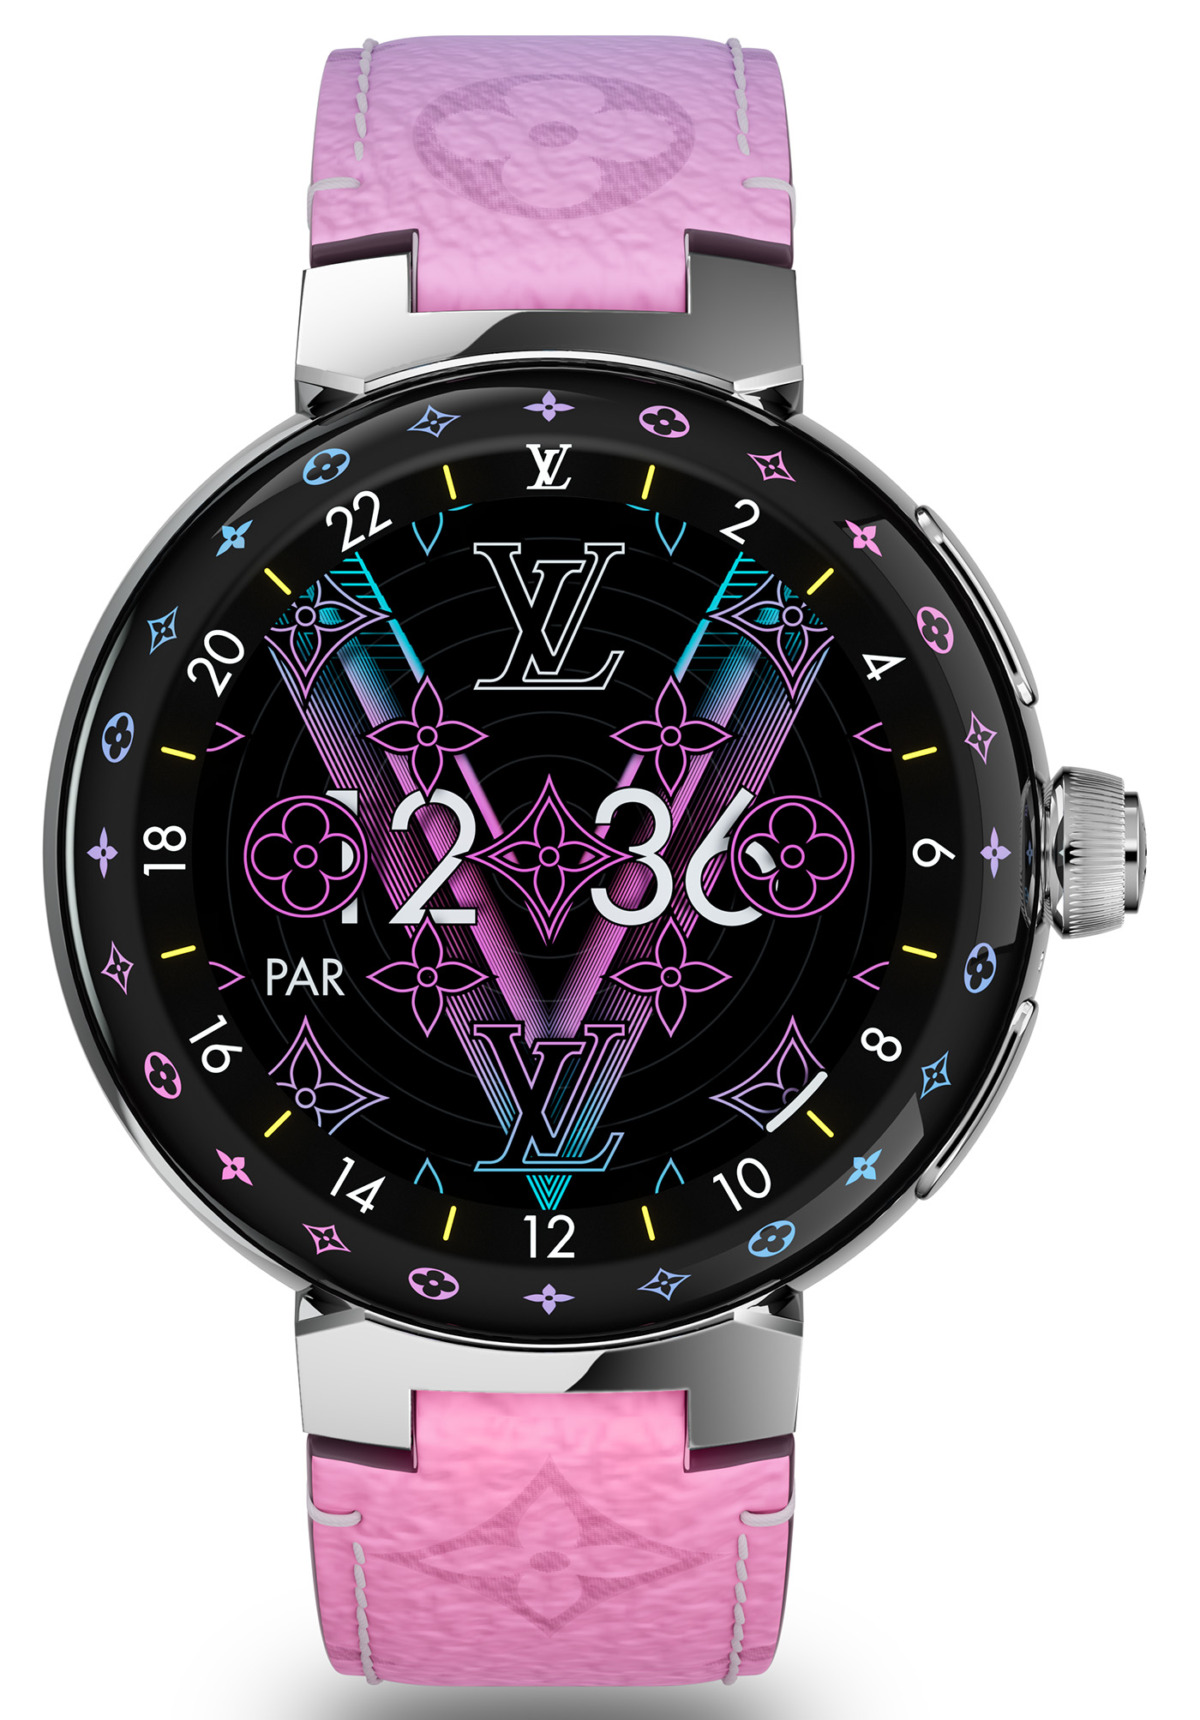 Louis Vuitton launches its first smartwatch: the Tambour Horizon